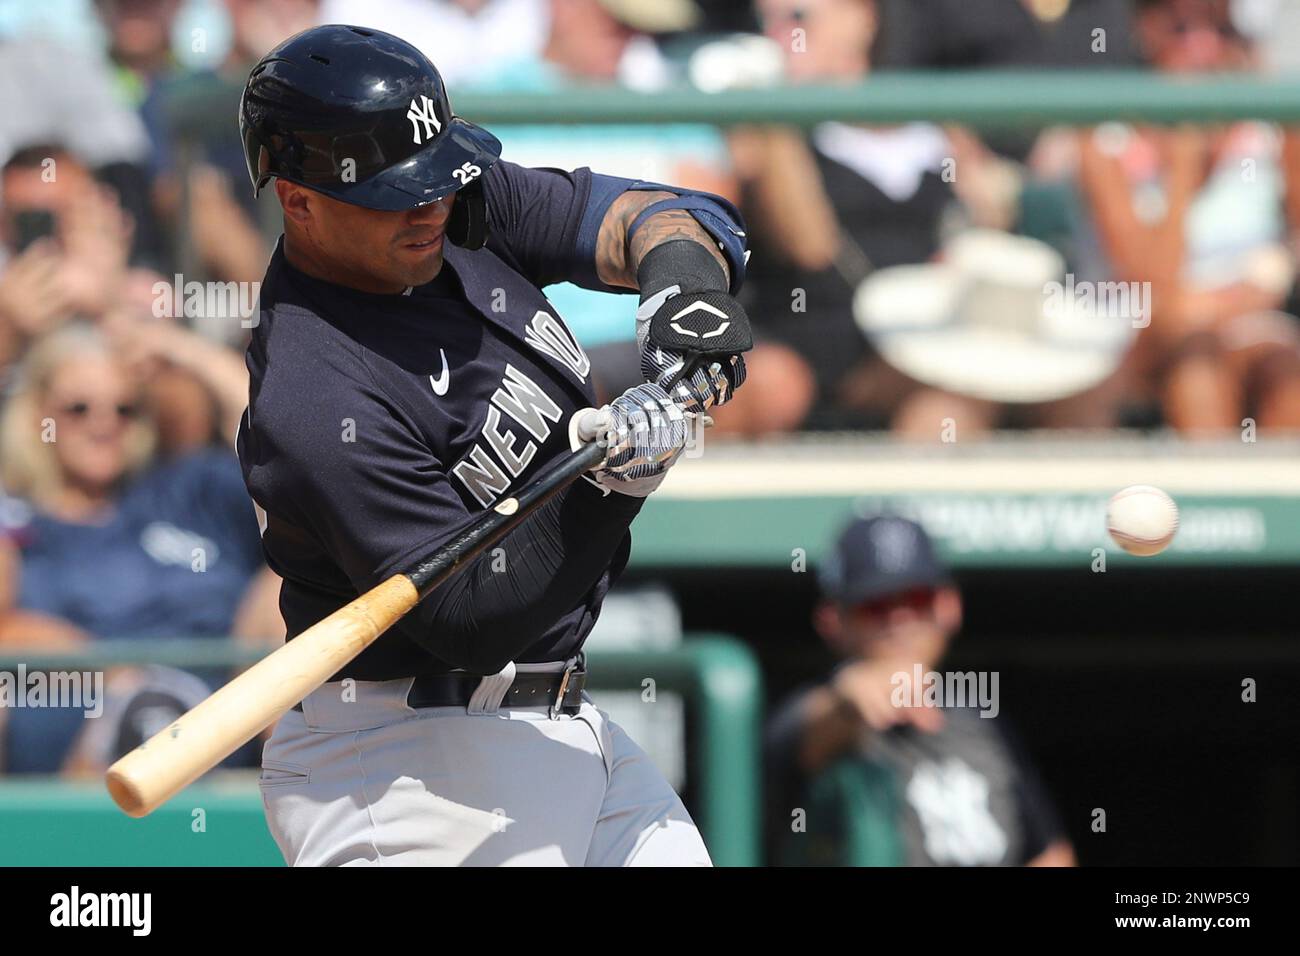 ST. PETERSBURG, FL - FEBRUARY 28: New York Yankees Infielder Gleyber Torres  (25) at bat during the MLB Spring Training game between the New York  Yankees and the Tampa Bay Rays on